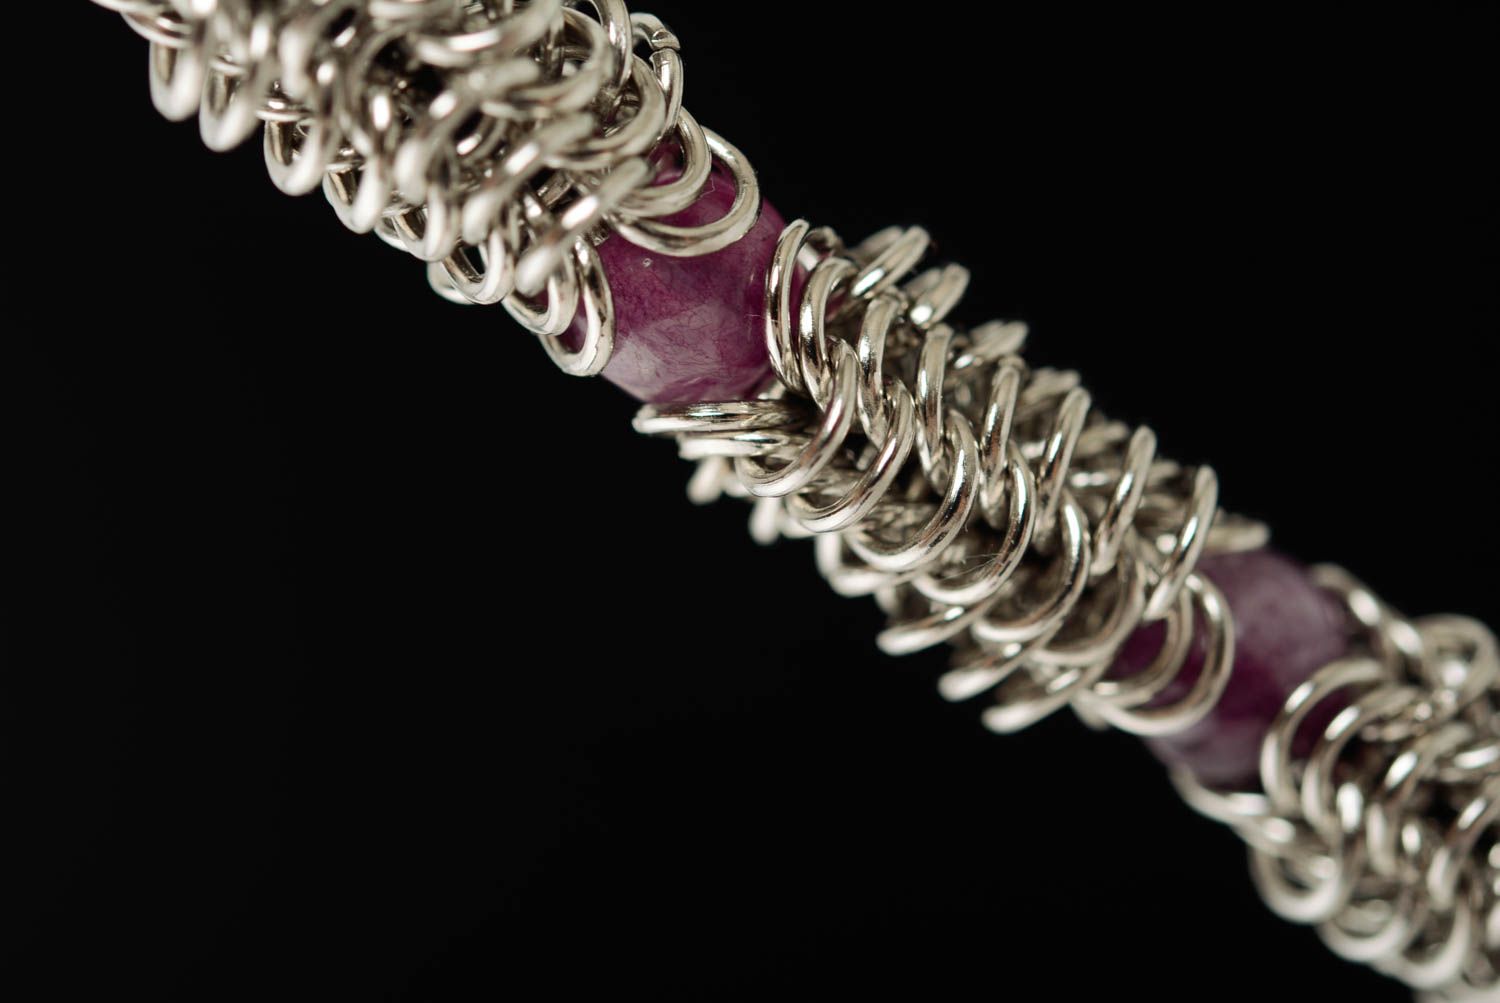 Handmade jewelry alloy bracelet chain mail weaving technique with amethyst photo 4